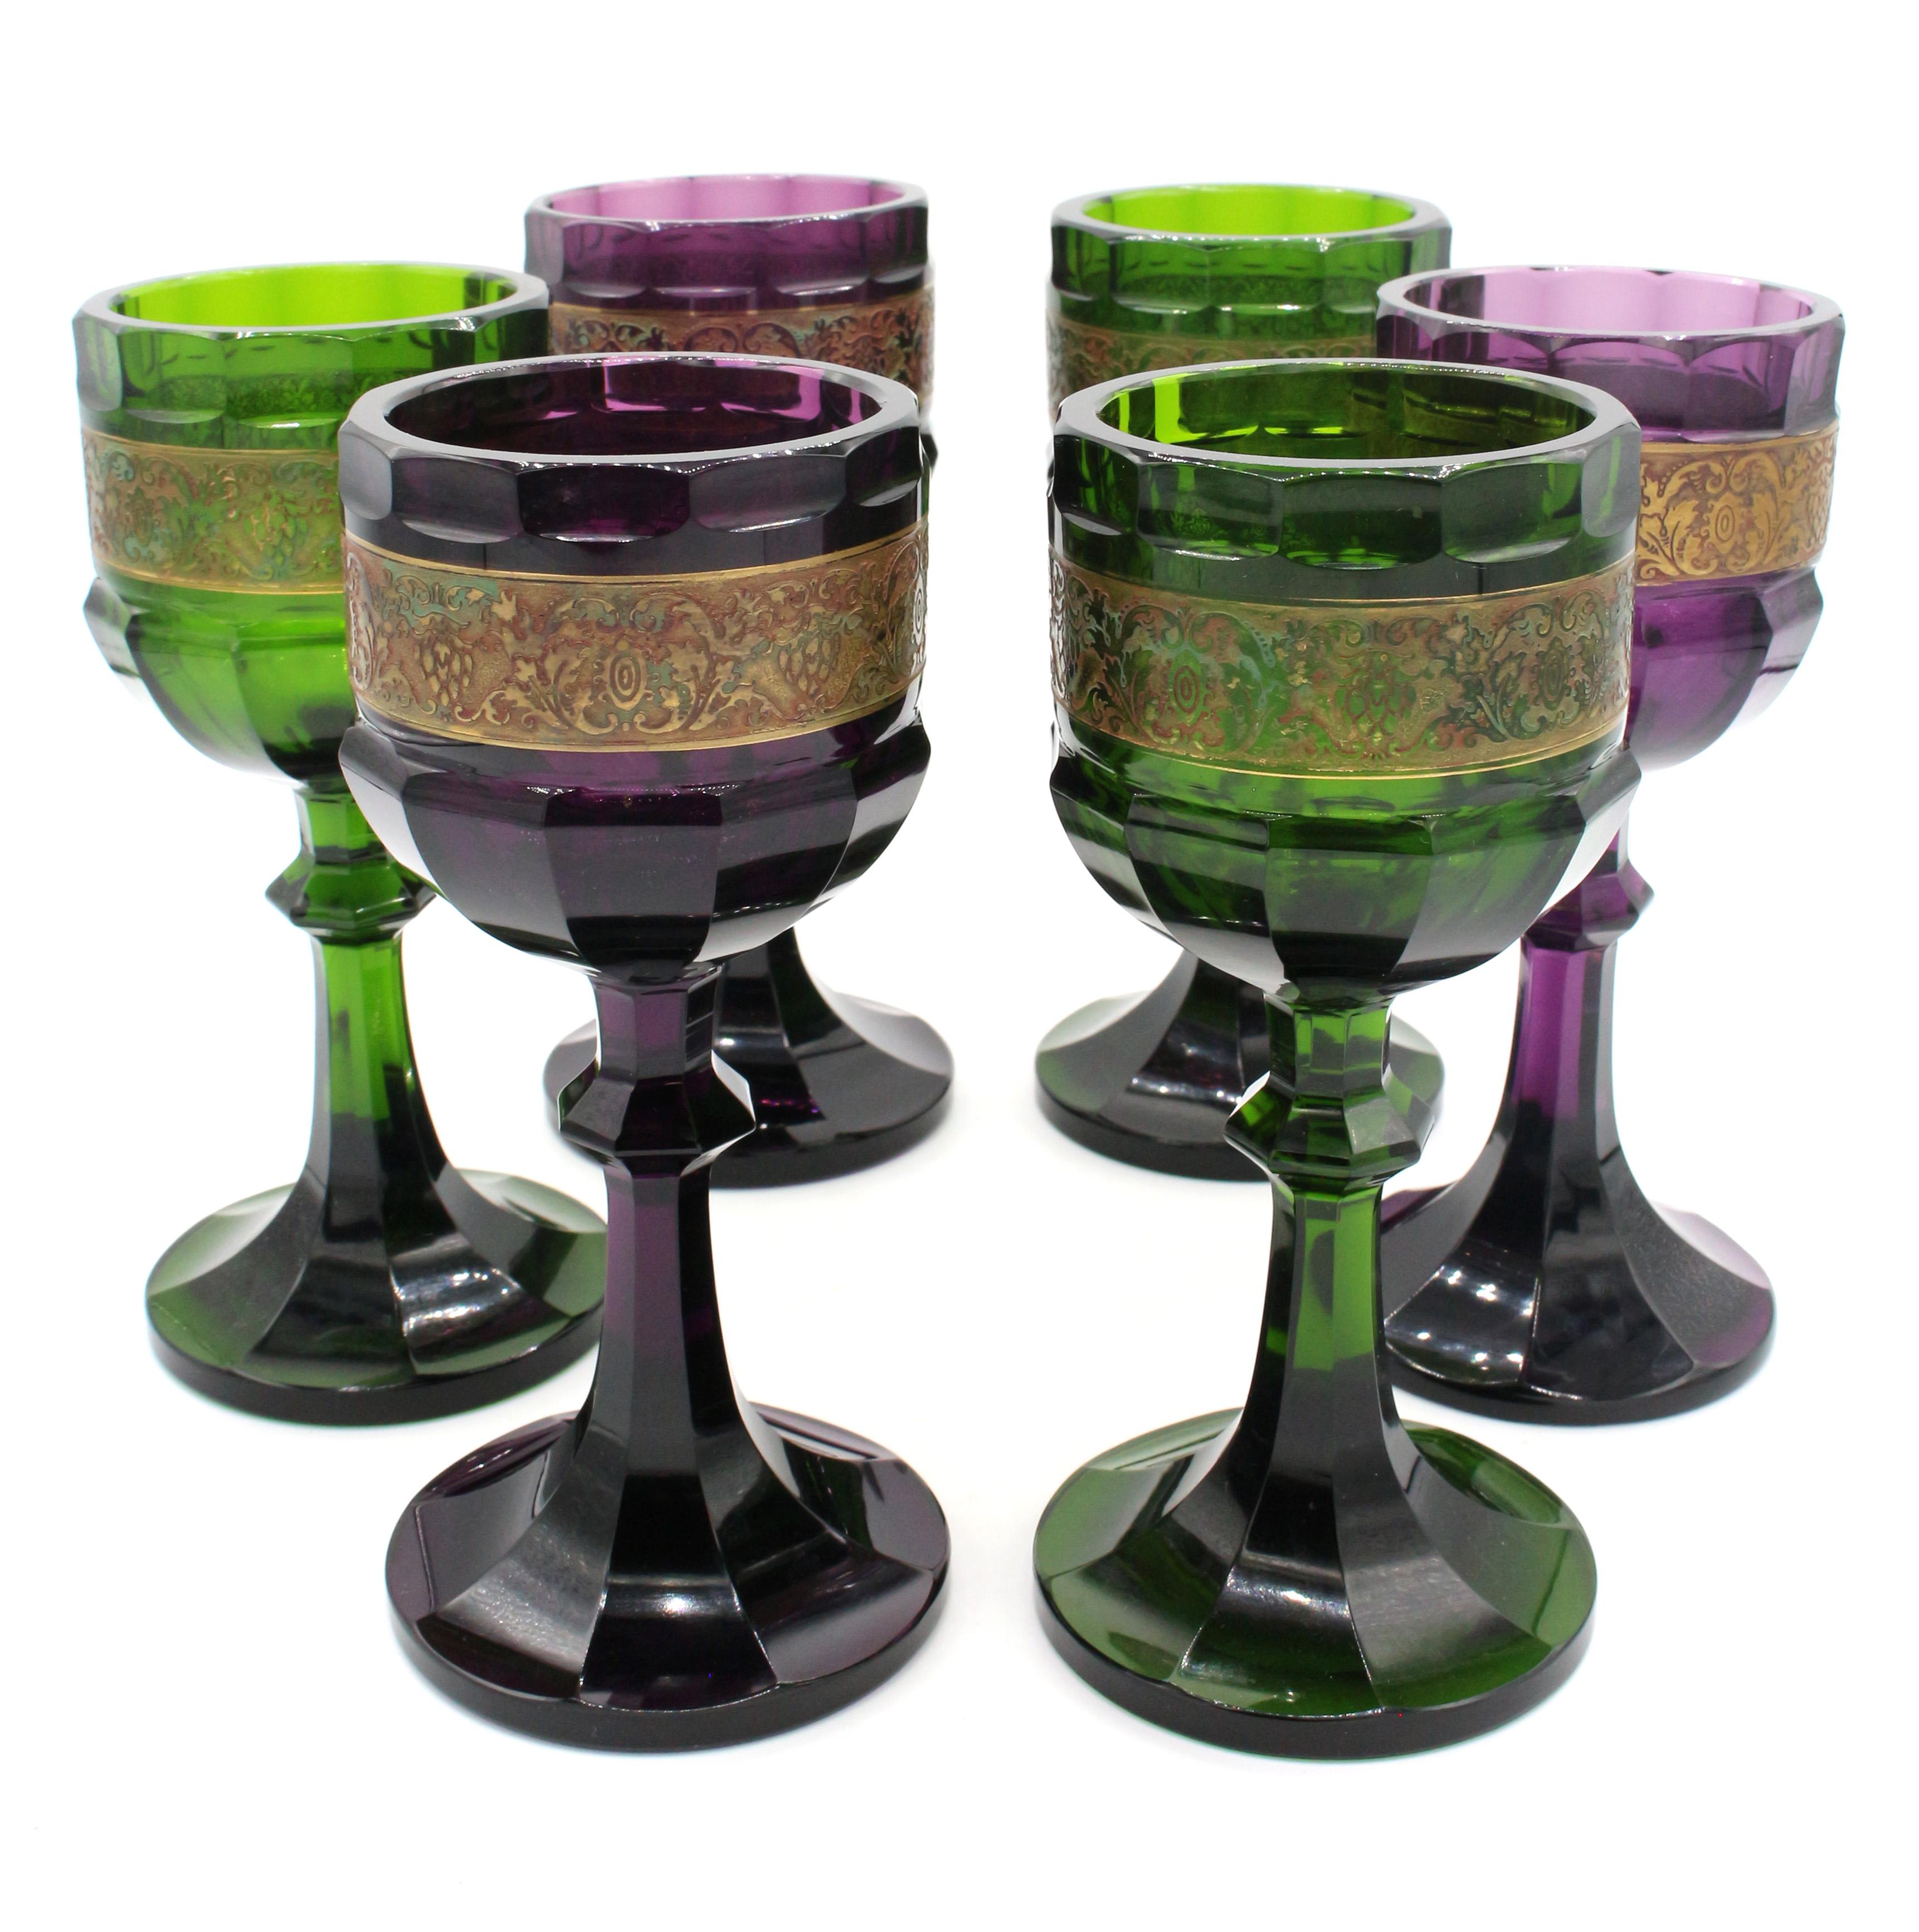 Set of 6 white wine goblets by Moser, Karlsbad, Bohemia, Arts & Crafts design, c.1920. Three of amethyst glass & 3 of emerald glass, each with intricate acid etched gilt bands of grape festoons, called 